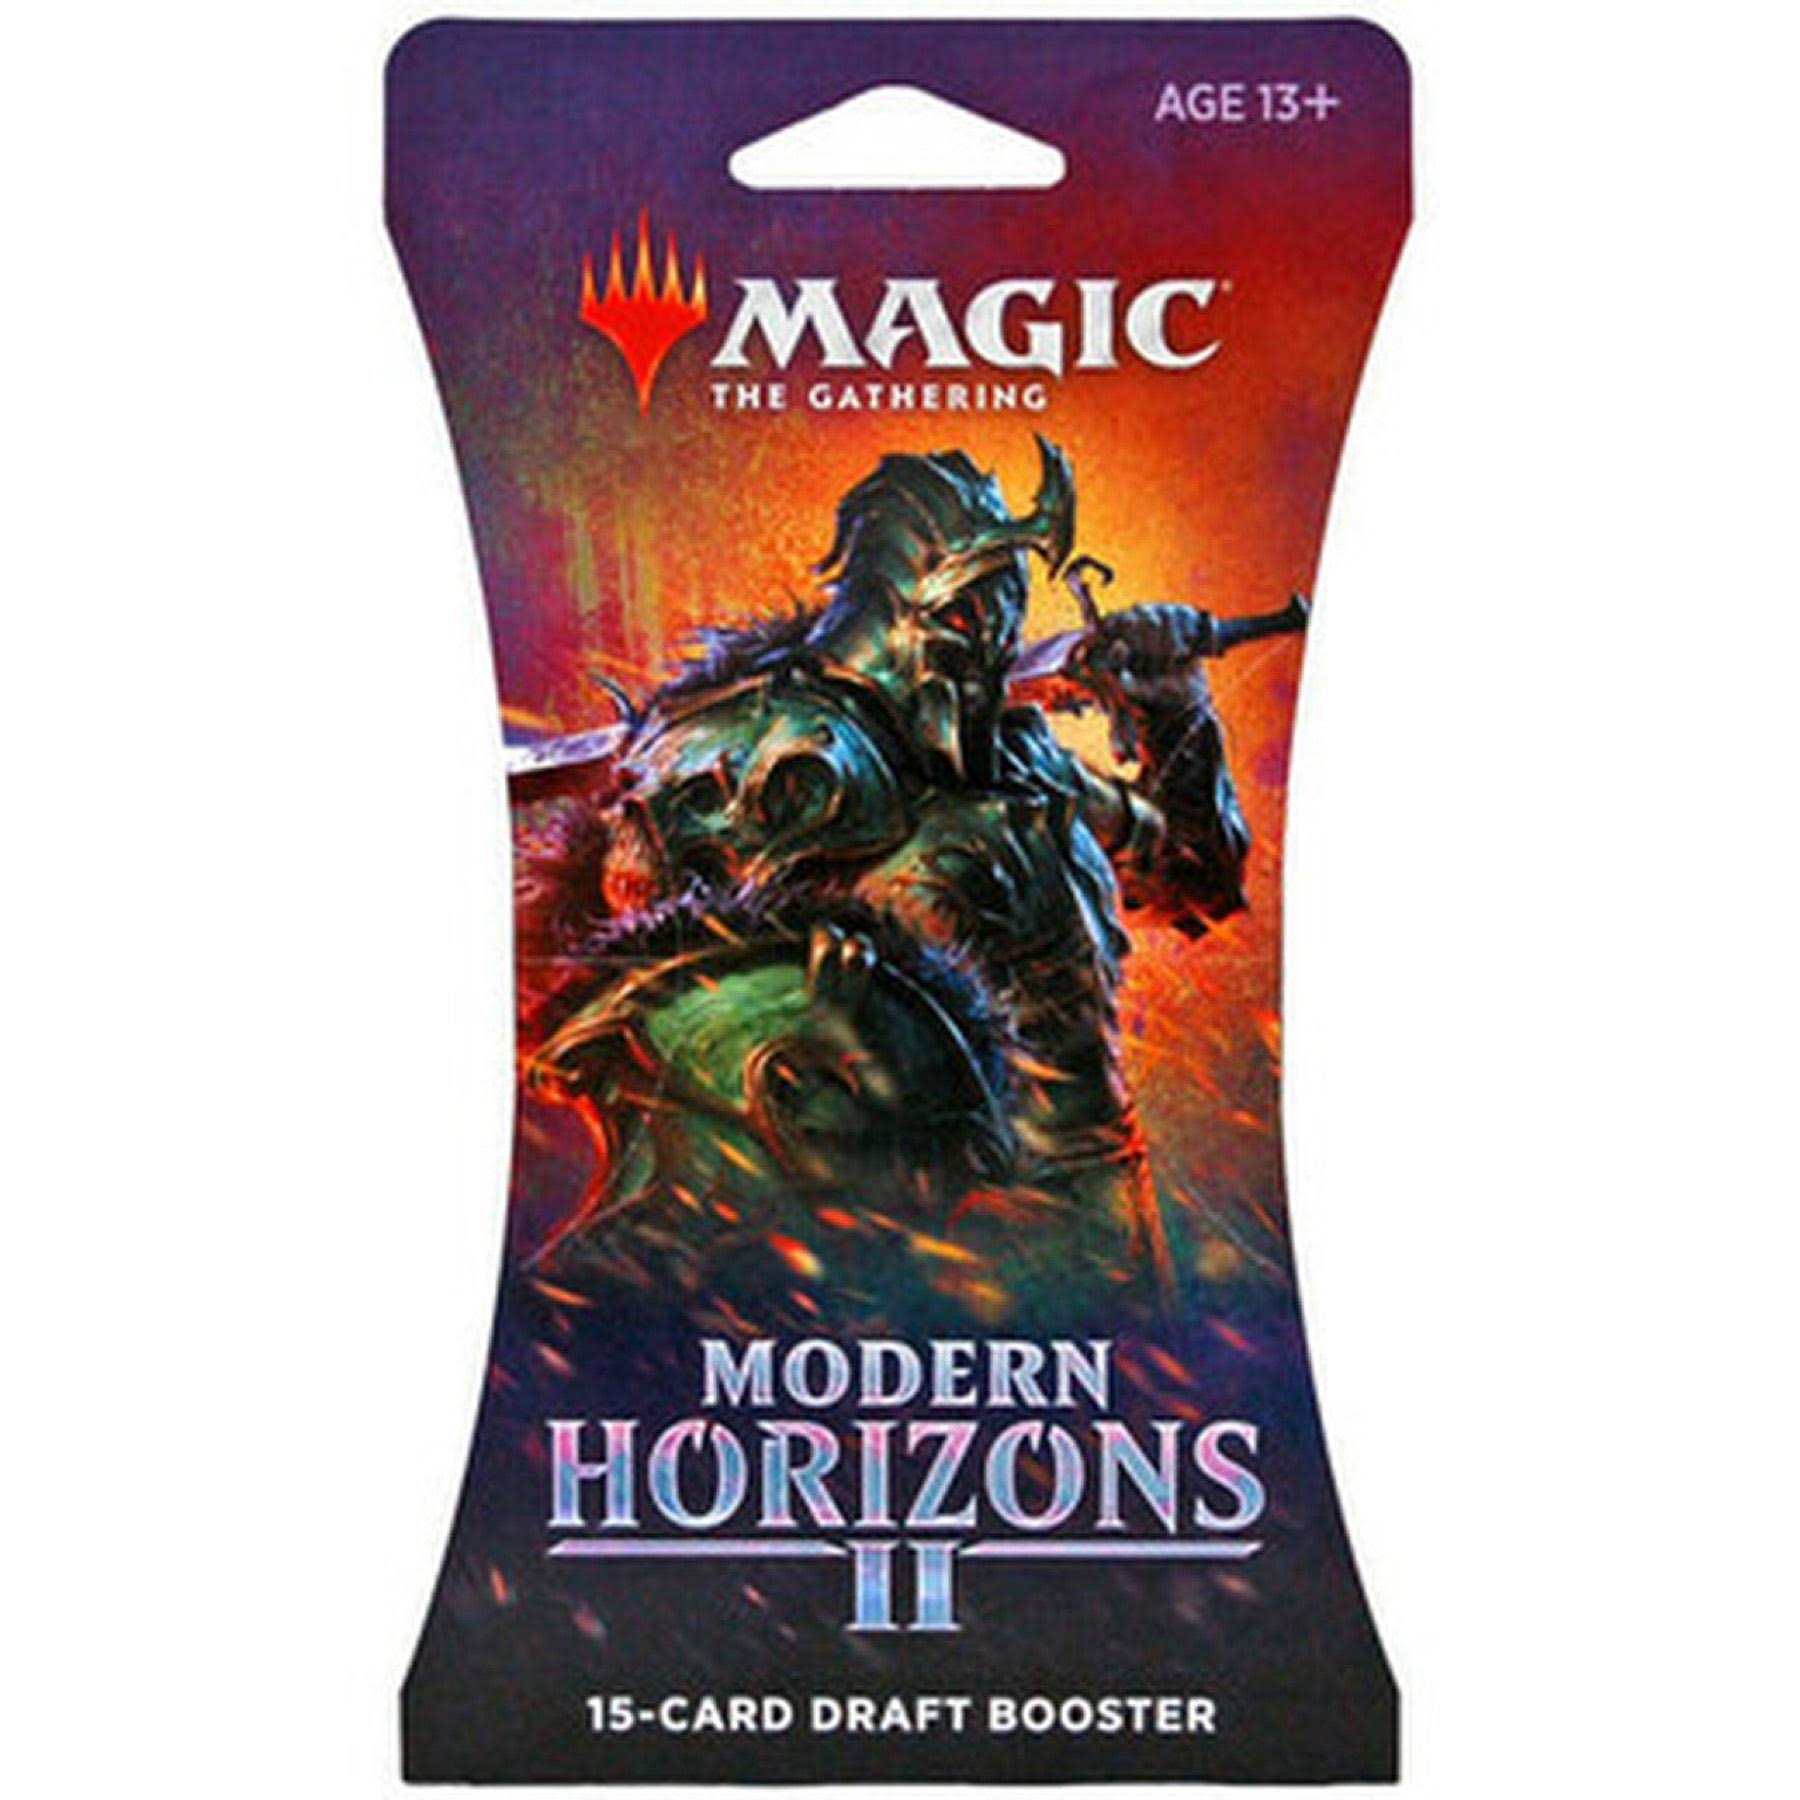 Magic The Gathering: Modern Horizons 2 - Sleeved Draft Booster Pack